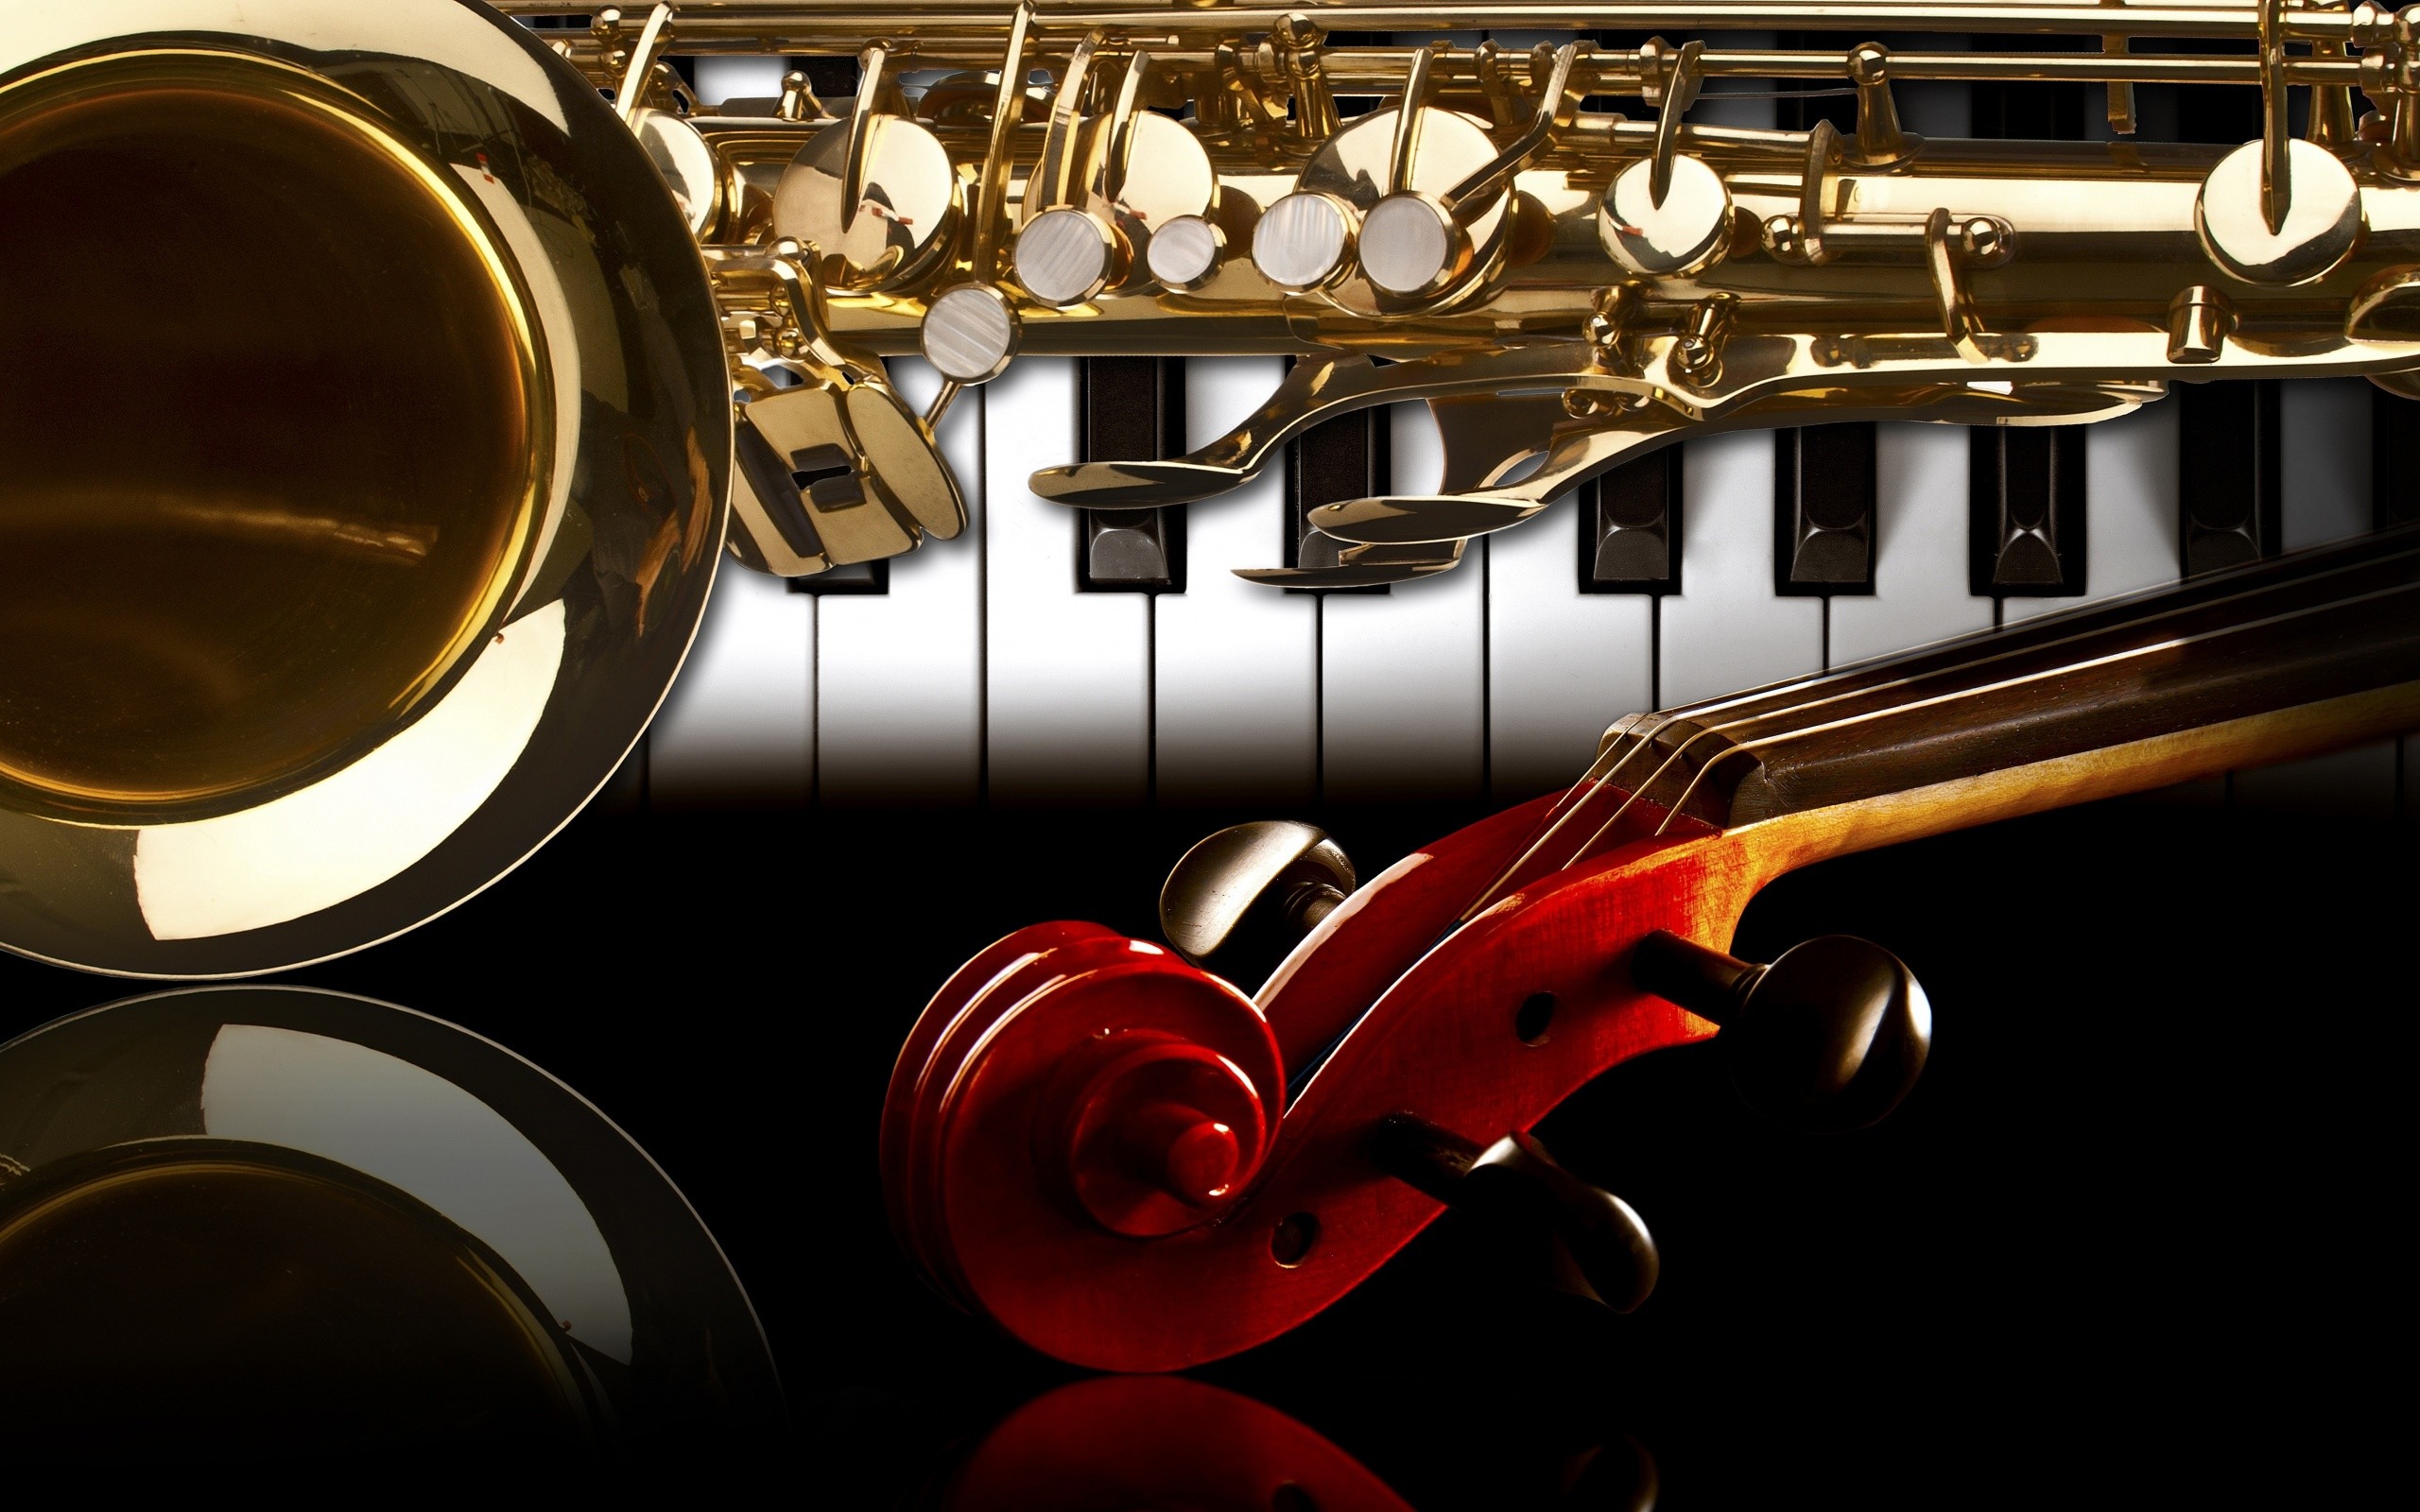 2560x1600 Band Musical Instruments Background